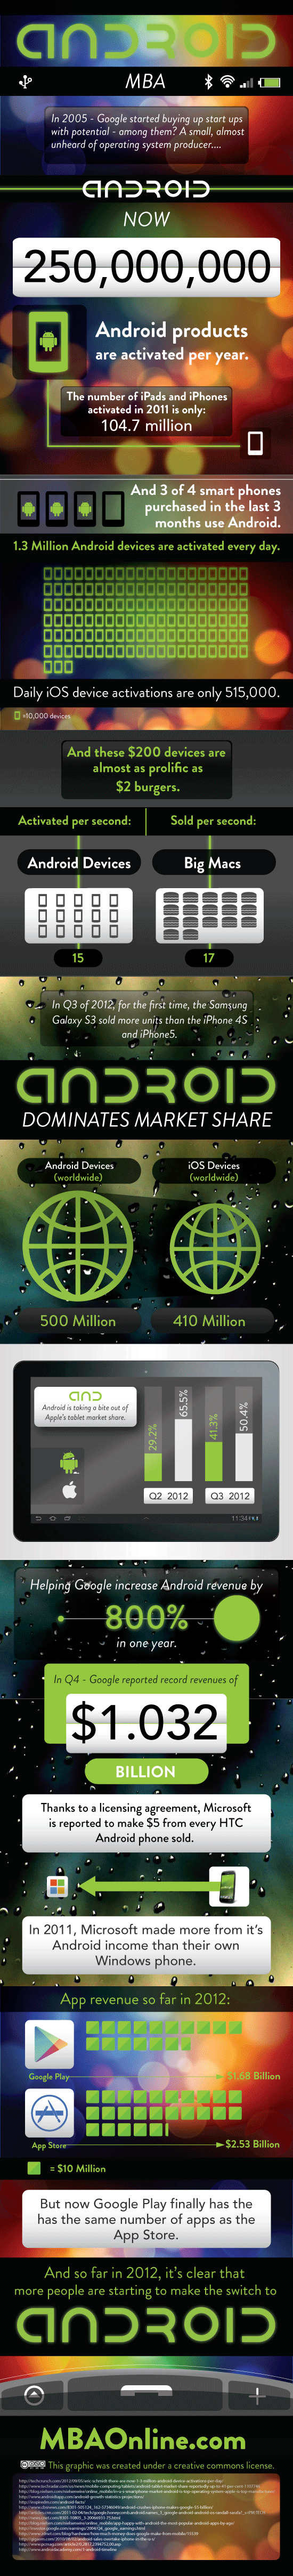 Rise of Android Infographic